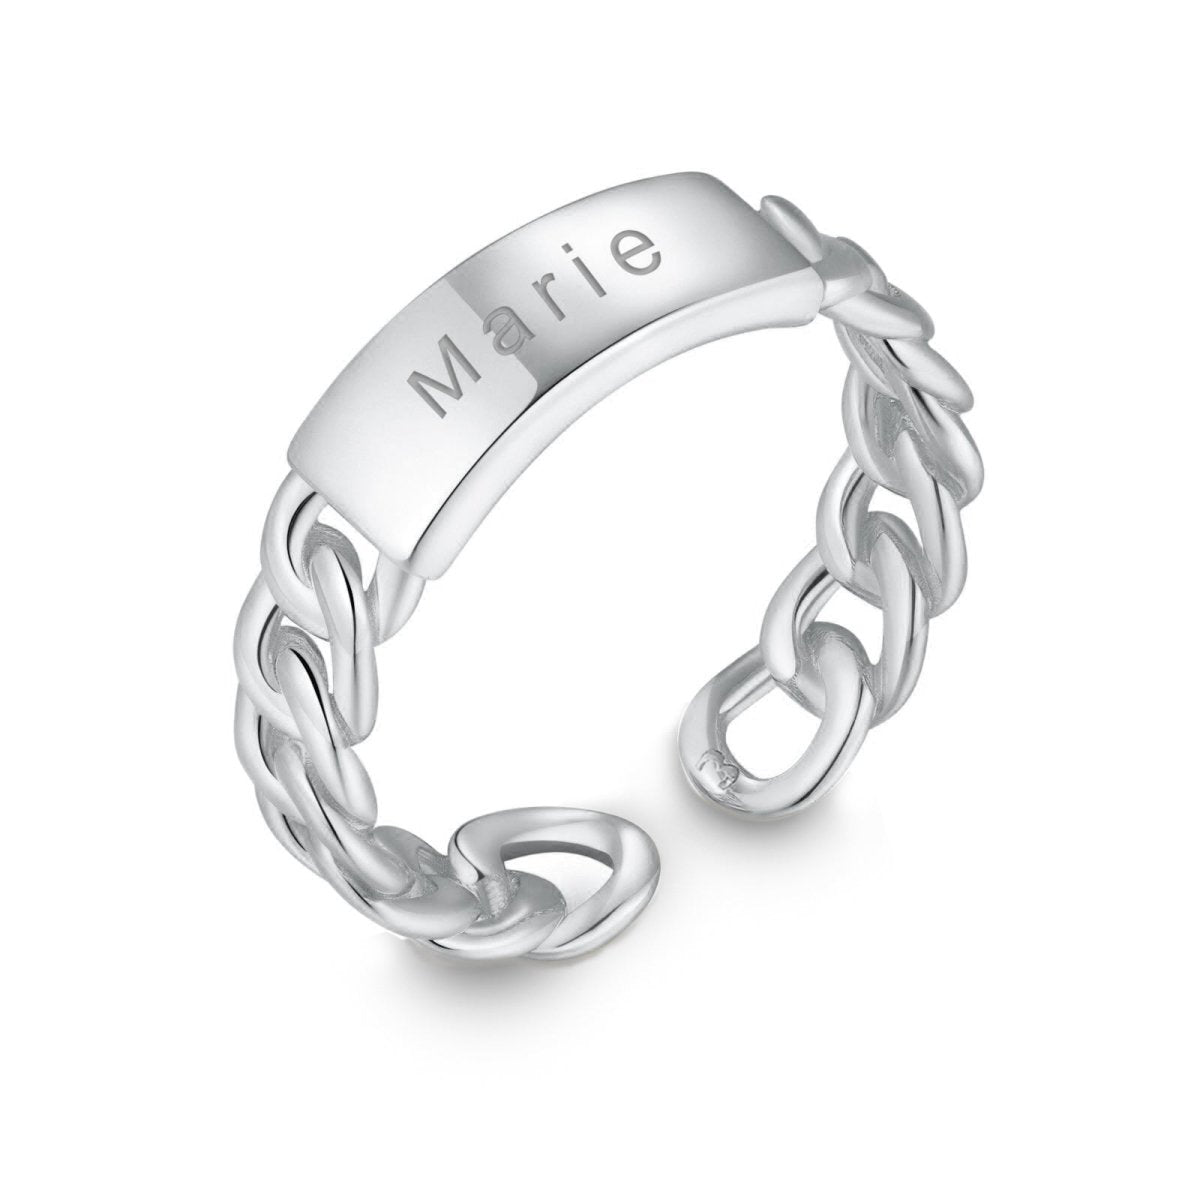 "Chains" Ring - Milas Jewels Shop